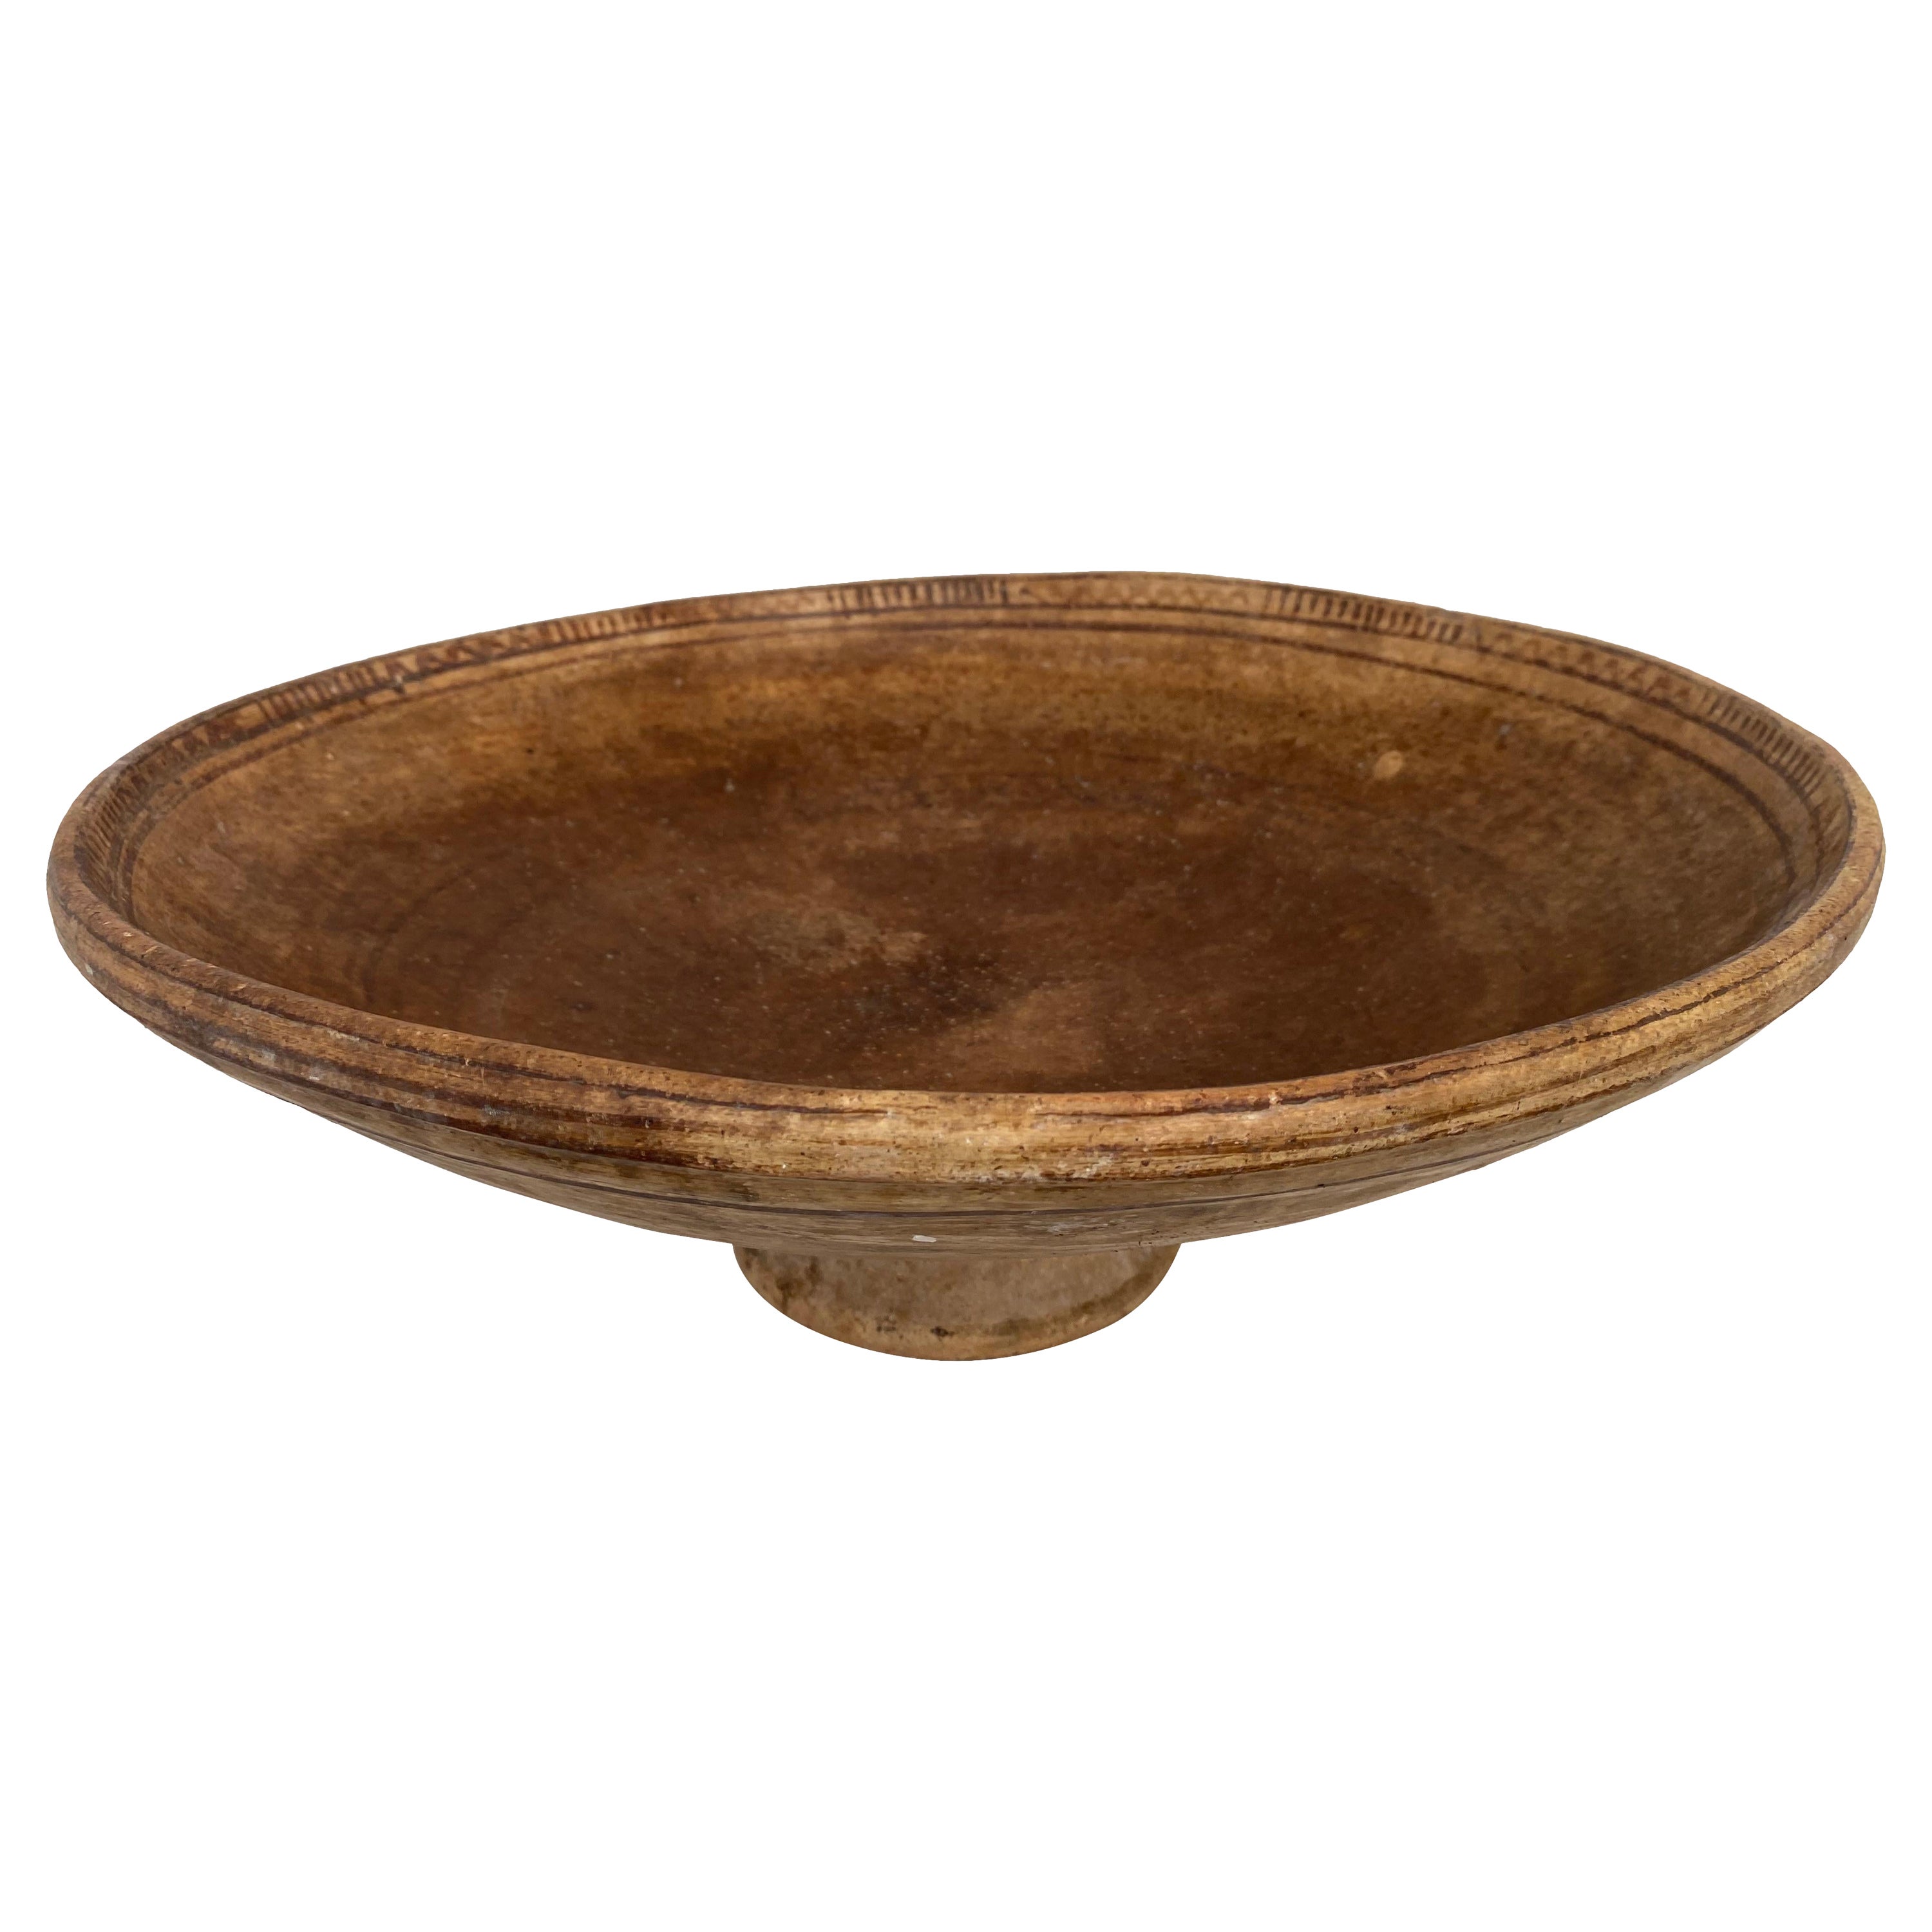 Antique, Terracotta Berber Bowl on a central foot For Sale